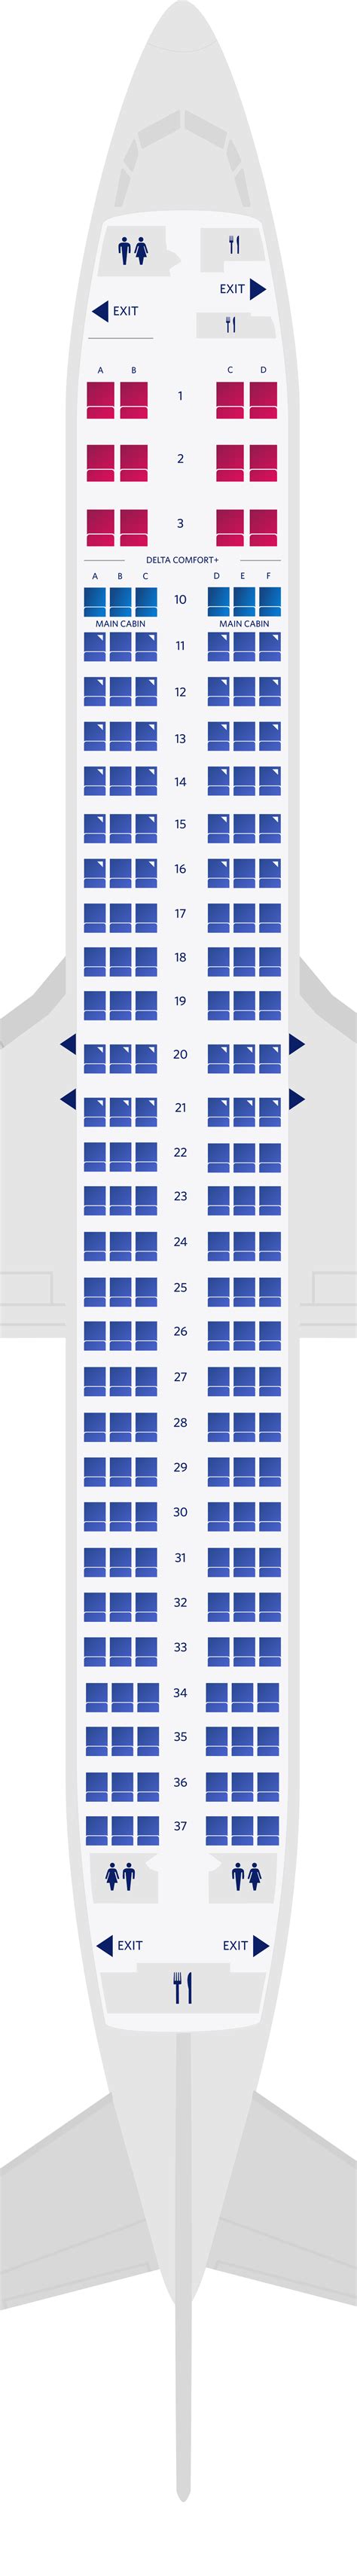 Delta 787-9 seat map. Seat Map of Boeing 787-9 (789) On this page, you will find seat map information on the Boeing 787-9 (789) aircraft. Reserve Seats. Book Now. 246 Seats. 215 Seats. 